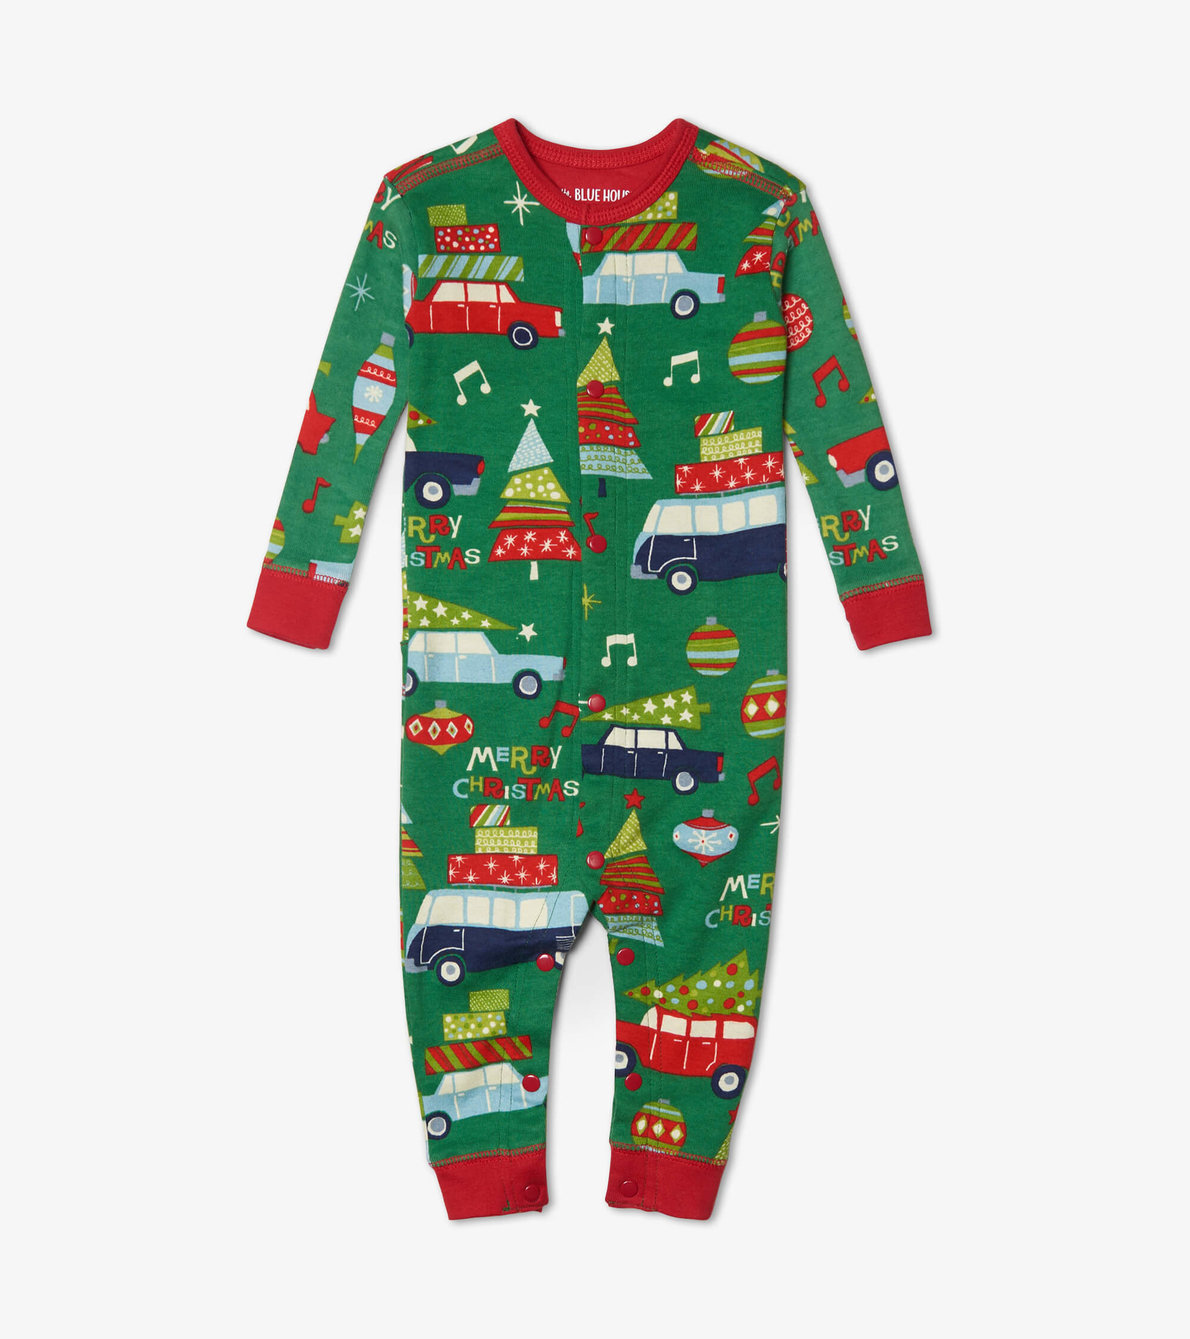 View larger image of Retro Festive Green Baby Union Suit